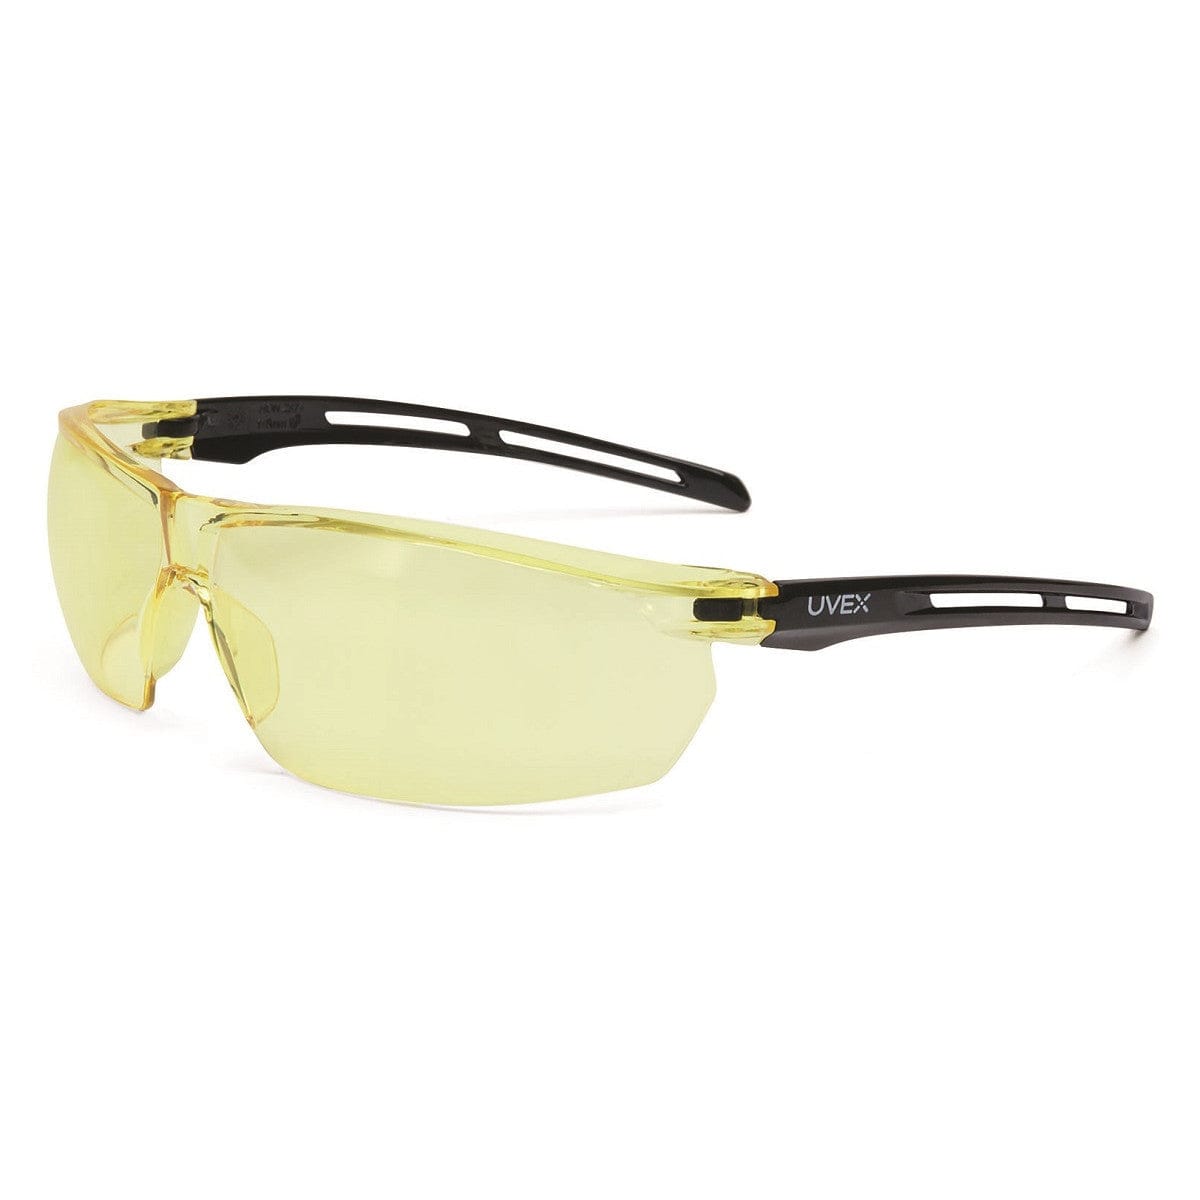 Uvex Tirade Safety Glasses Amber Anti-Fog Lens with Foam-Padding Removed